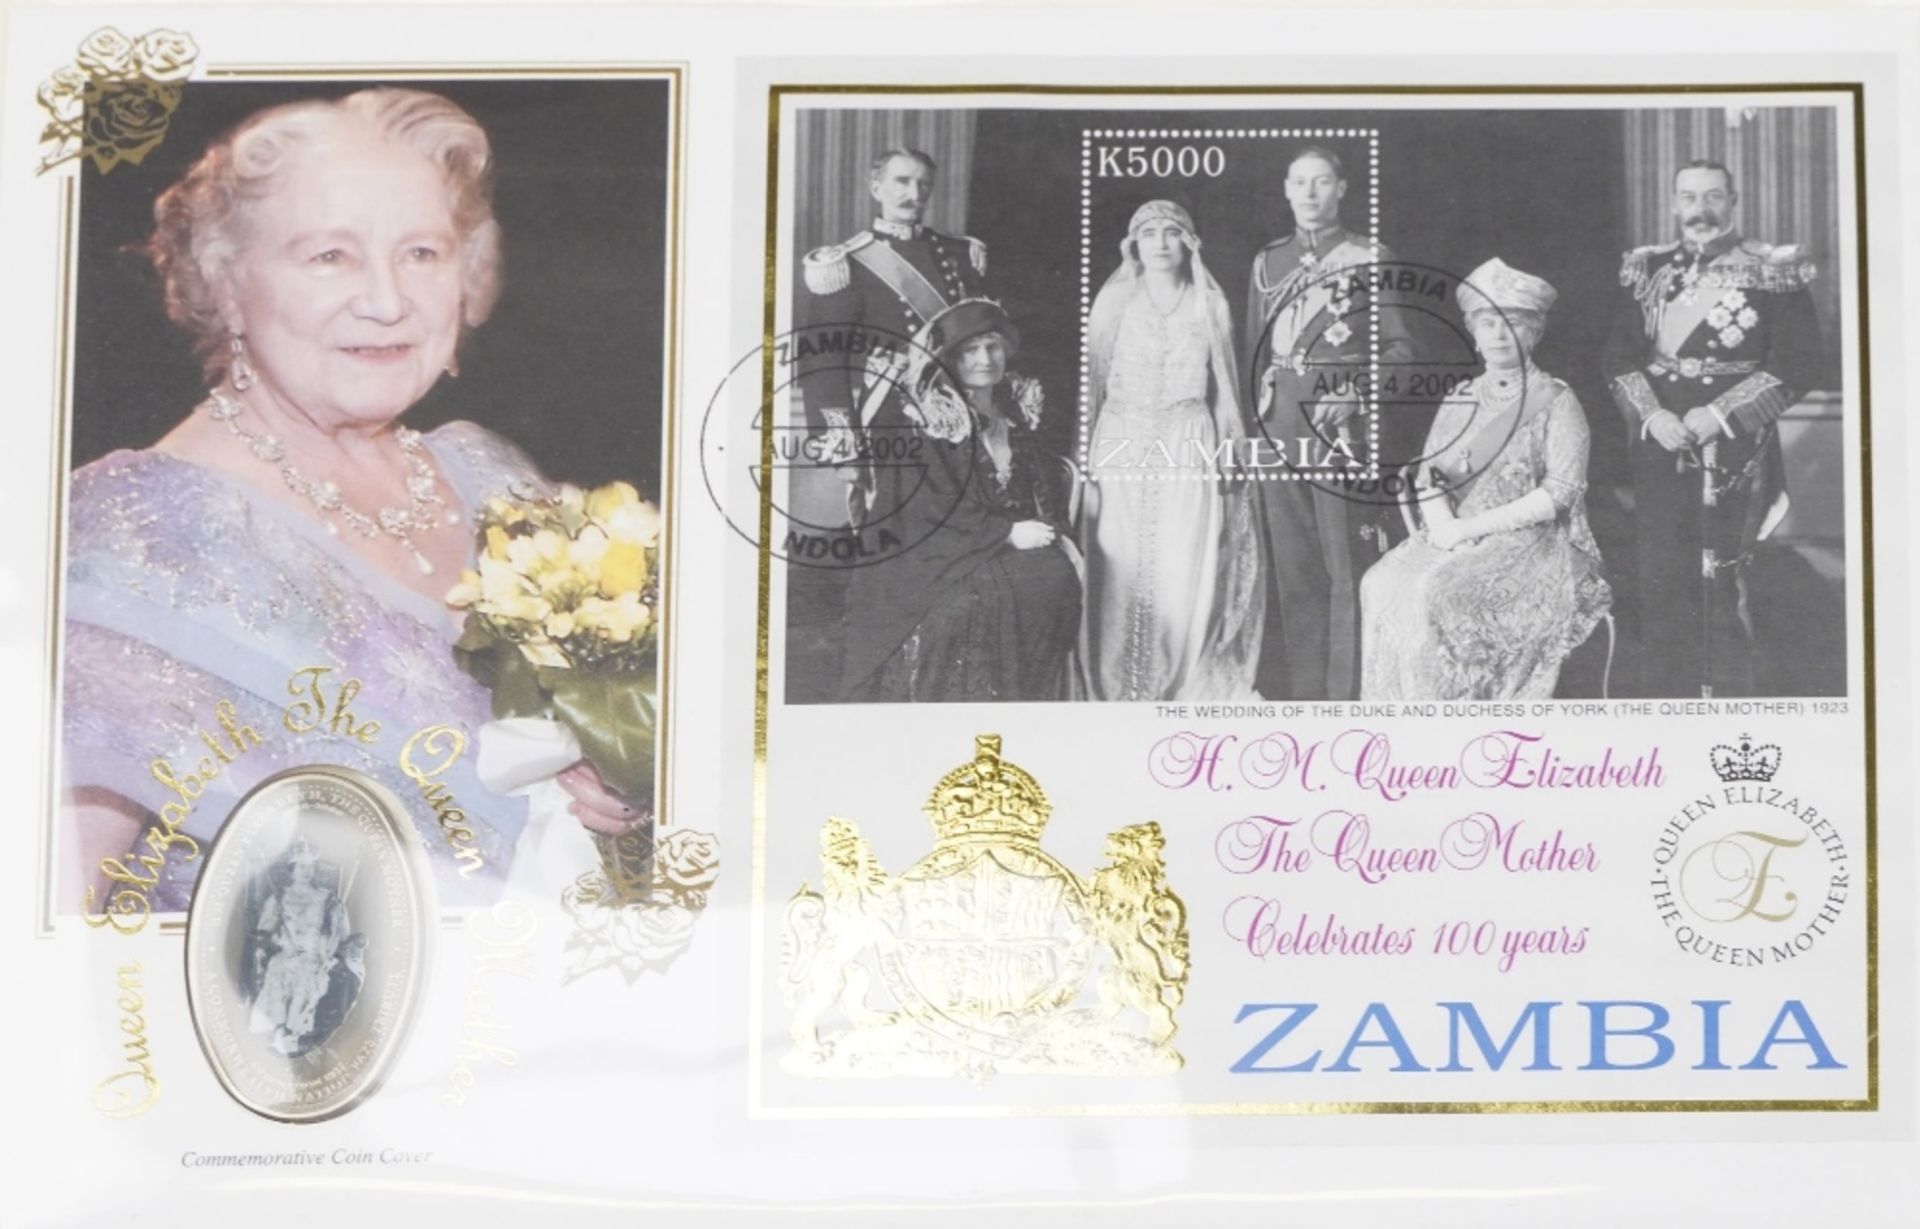 Commemorative coin covers arranged in two albums including The Life and Times of The Queen Mother